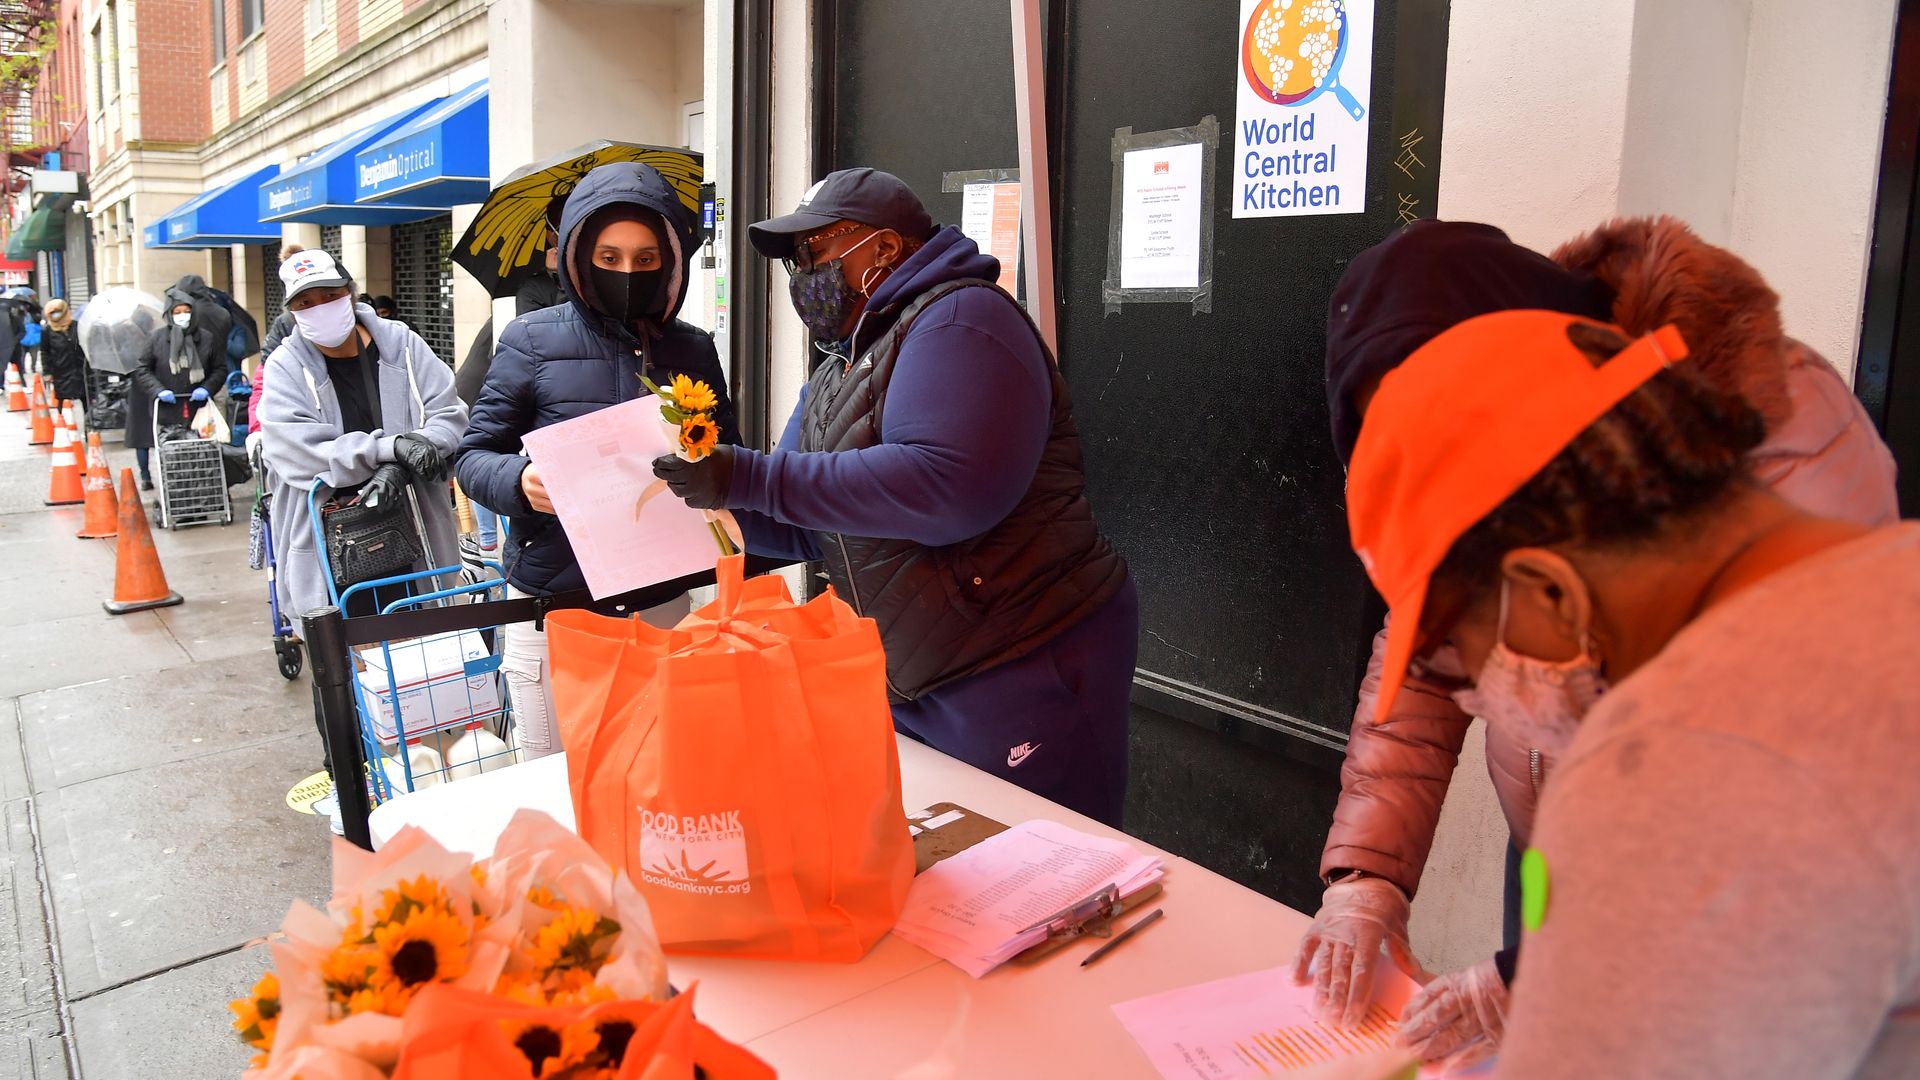 People line up A volunteer distributes childcare essentials to families in need for Mother's Day at Food Bank For New York City’s Community Kitchen & Food Pantry.